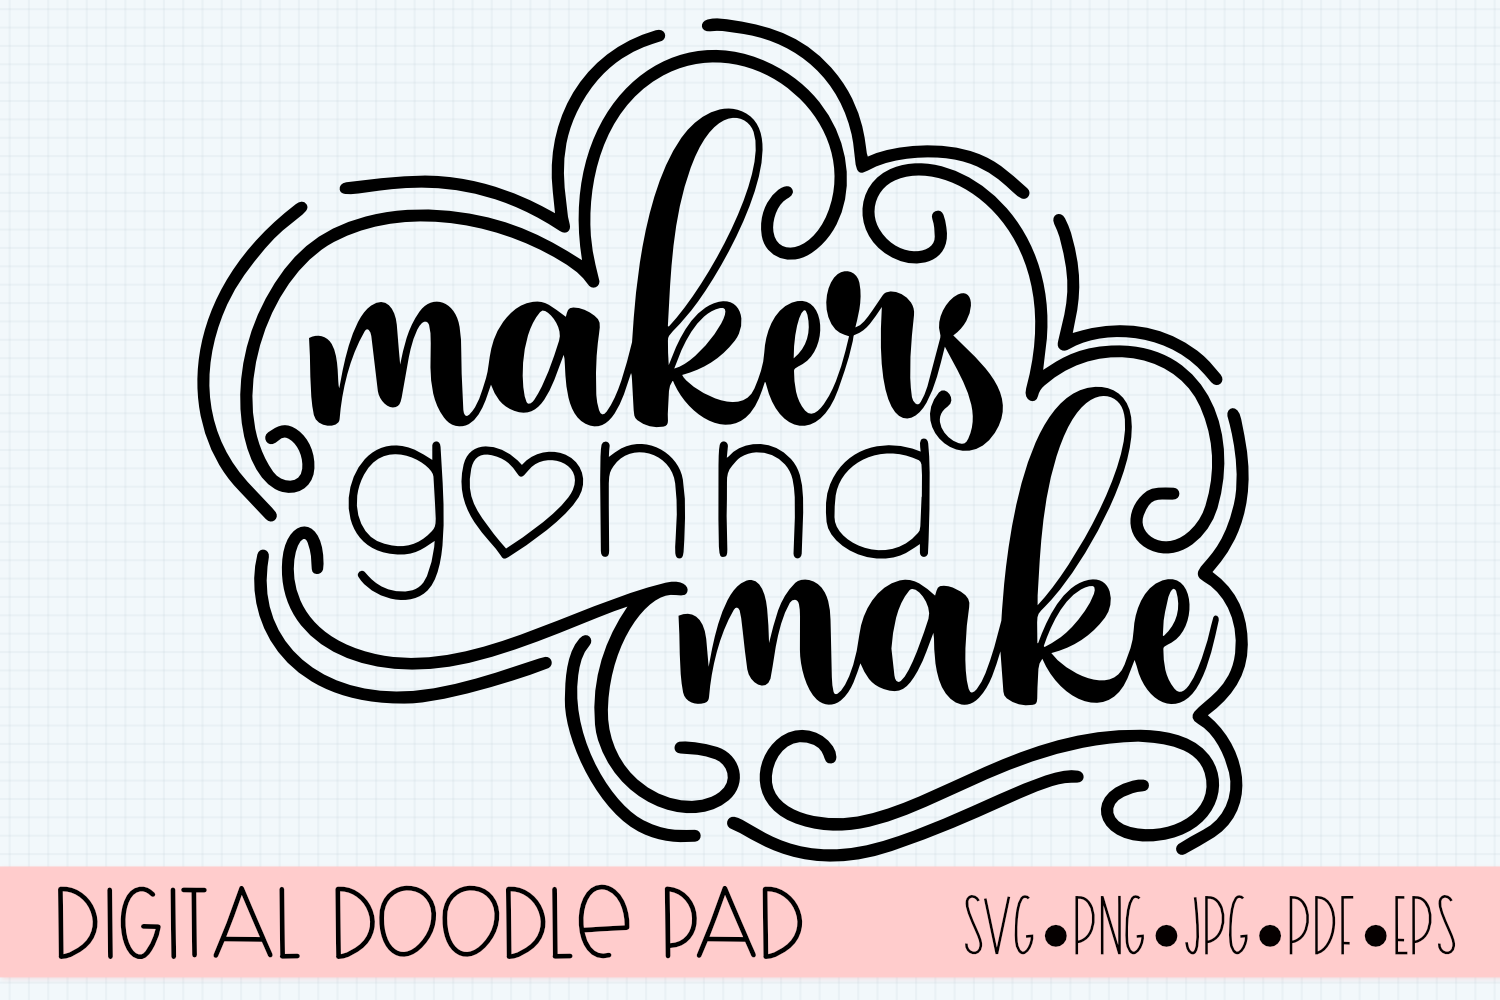 Makers | Crafter SVG Cut File for Silhouette & Cricut